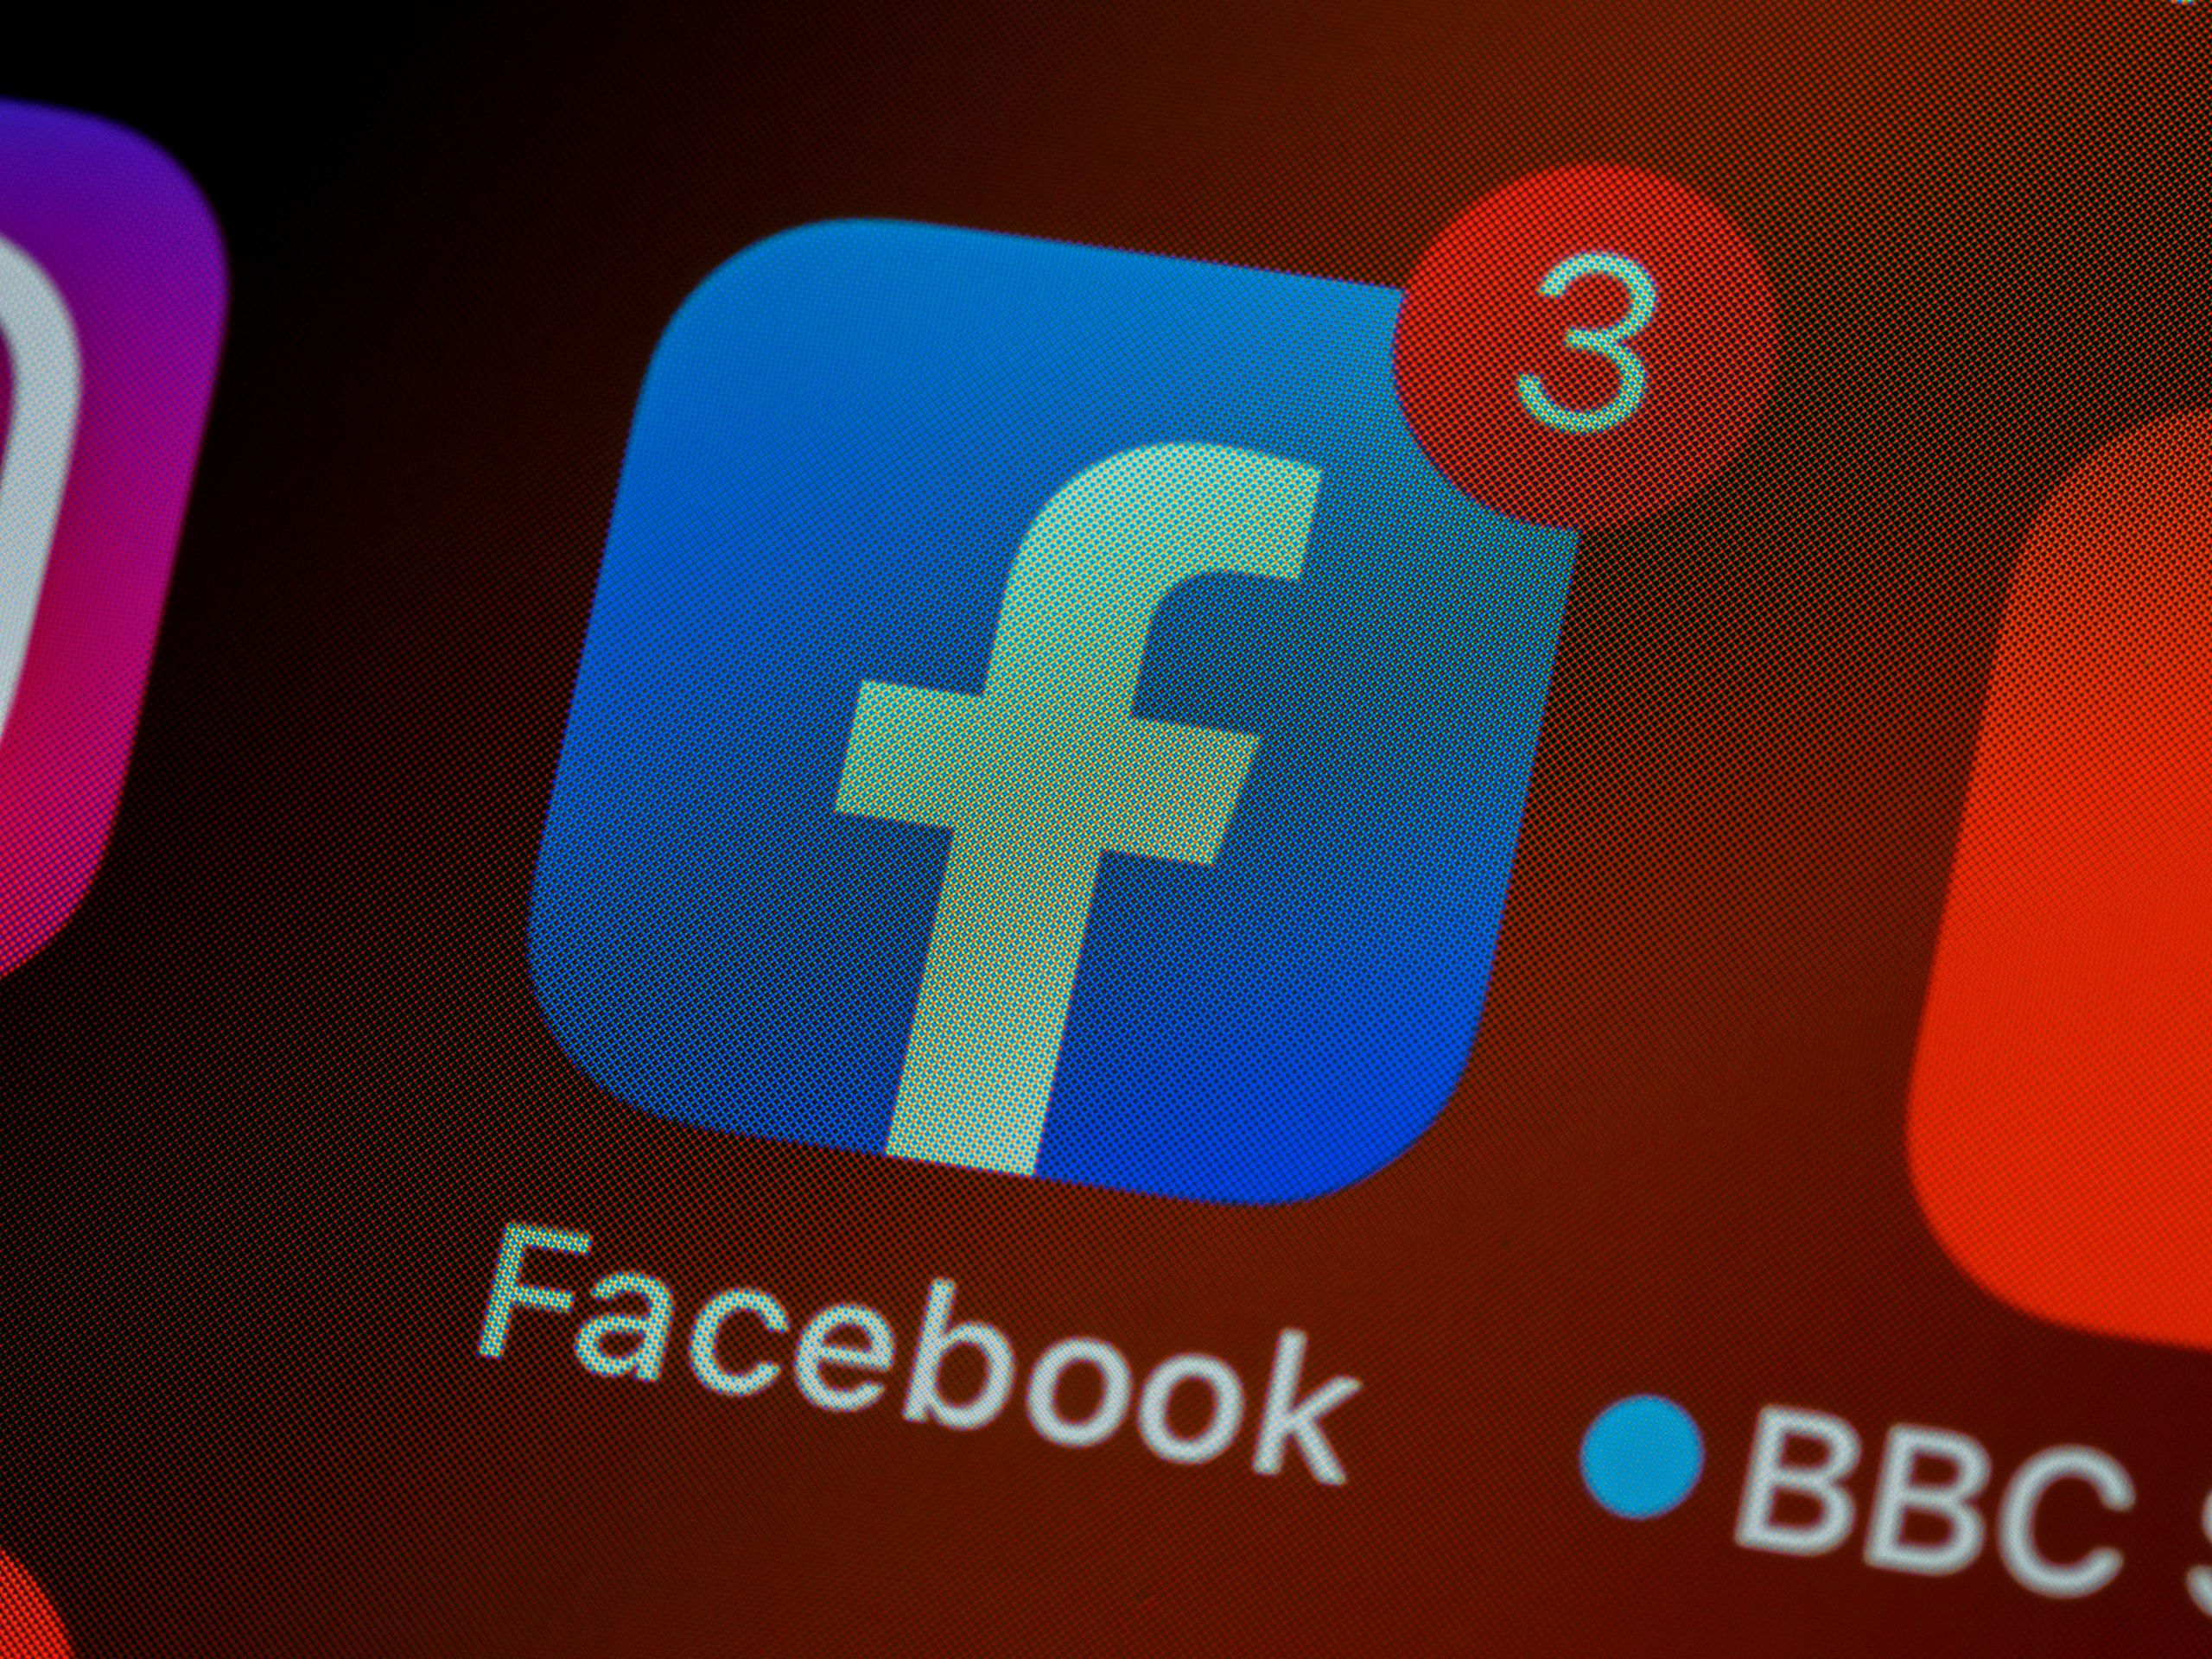 As Facebook reportedly plans rebrand, other firms that have done the same